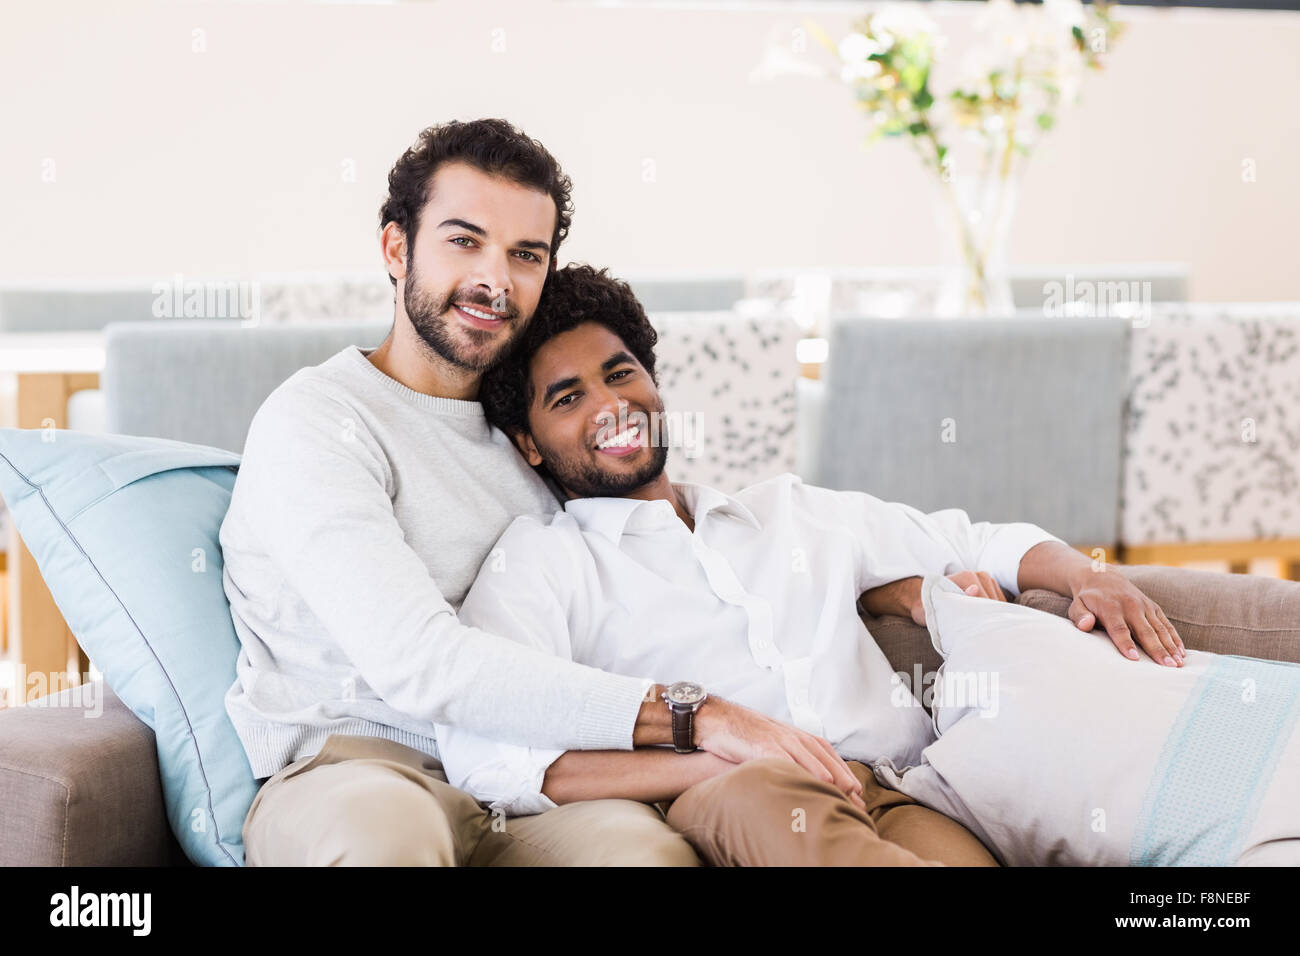 Happy gay couple relaxing on sofa Banque D'Images